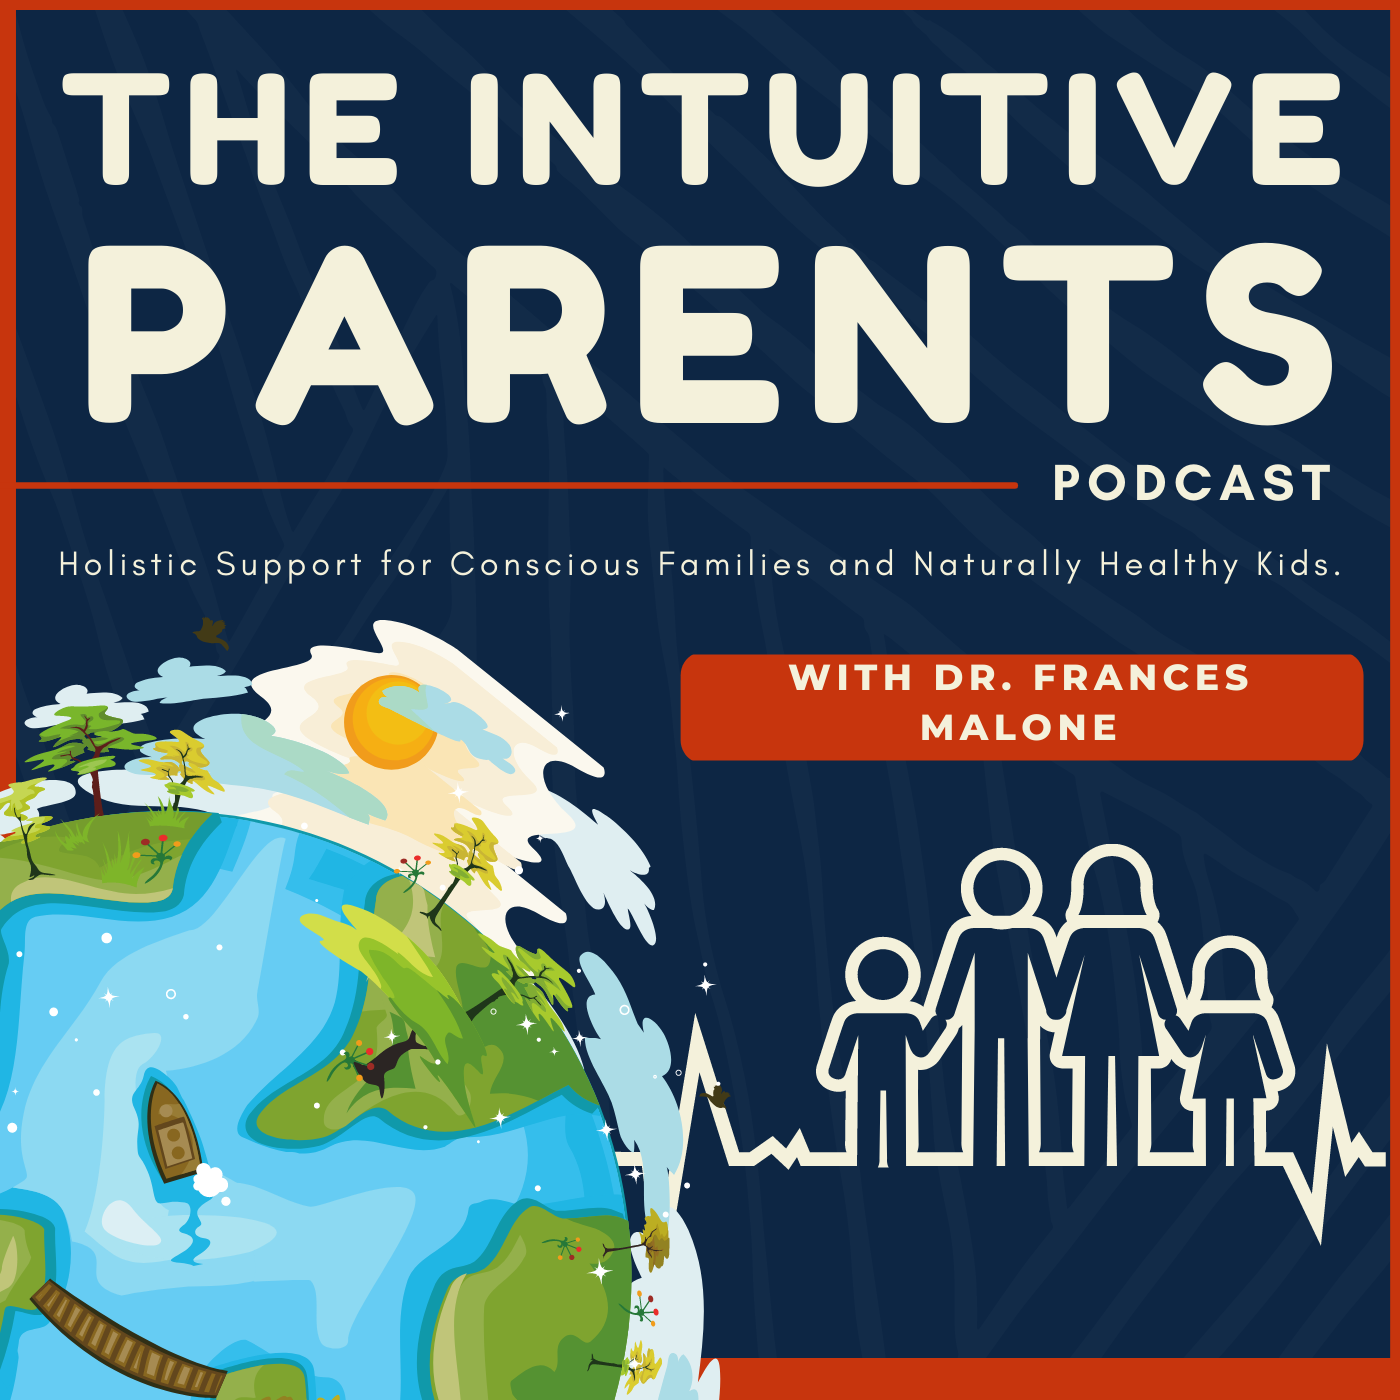 The Intutive Parents Podcast hosted by Dr. Frances Malone ARNP, PhD  a local Bainbridge Island, Washington leader in the field of integrative pediatric medicine and holistic  support and education for parents. Frances Malone is also the founder of Malone Pediatrics, The Intuitive Parents Collective, and DogFishMoon Sanctuary, and Chartreuse: Vibrantly Green Skincare. 